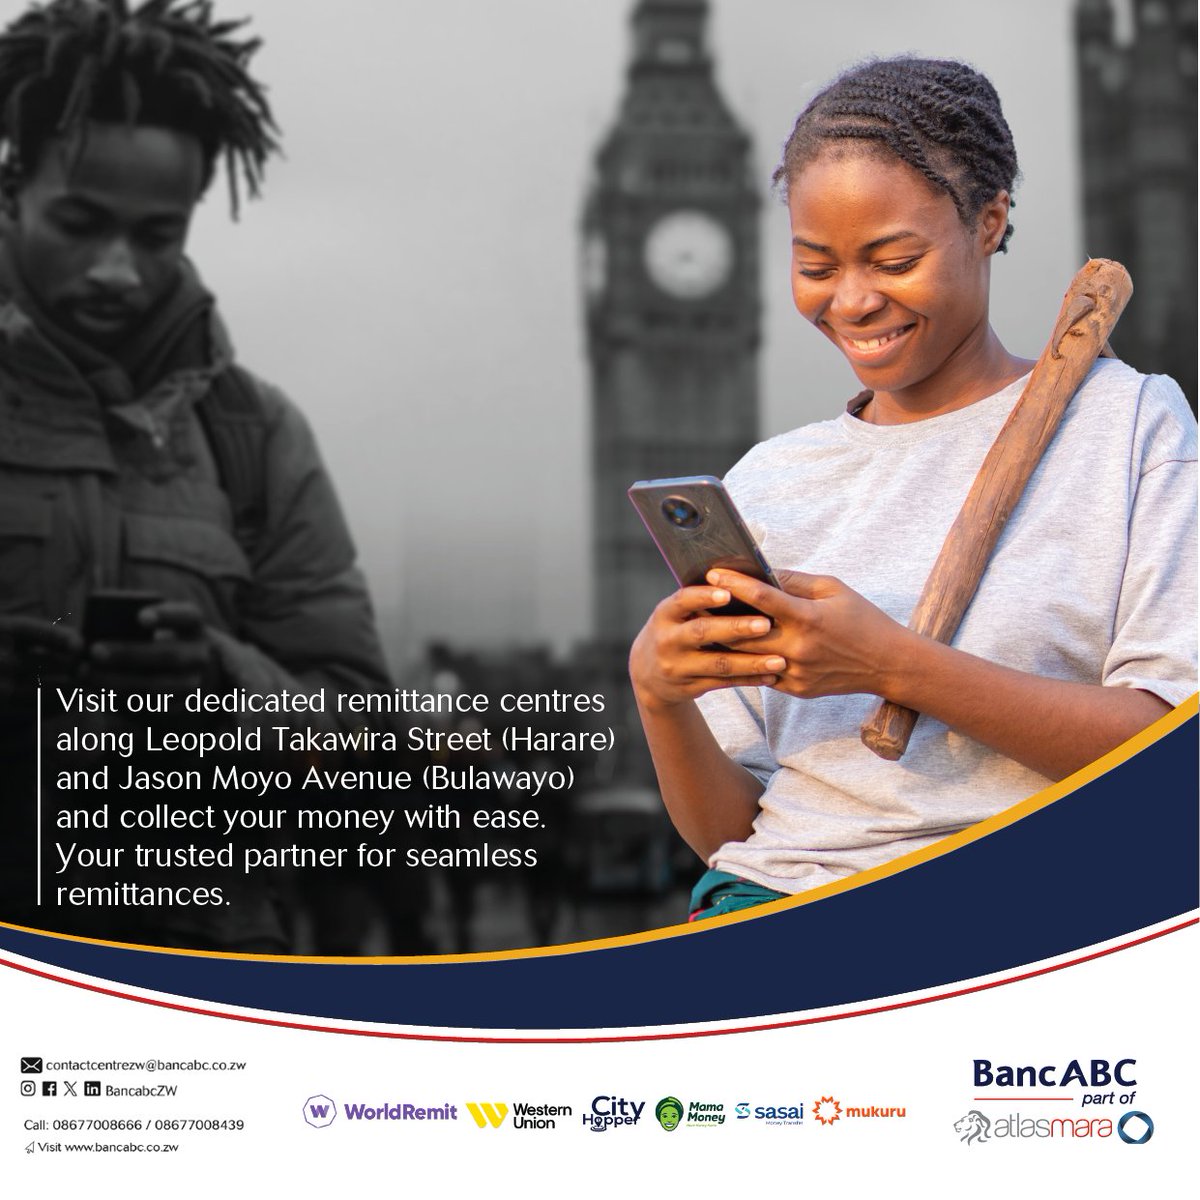 Enjoy the convenience of accessing💸 ✅ World Remit ✅ Mukuru ✅ City Hopper ✅ Western Union ✅ Mama Money ✅ Sasai Money Transfer Available at our dedicated Remittance Centres in Harare and Bulawayo. Your One-Stop-Shop for ALL remittances. #BankDifferent🏦